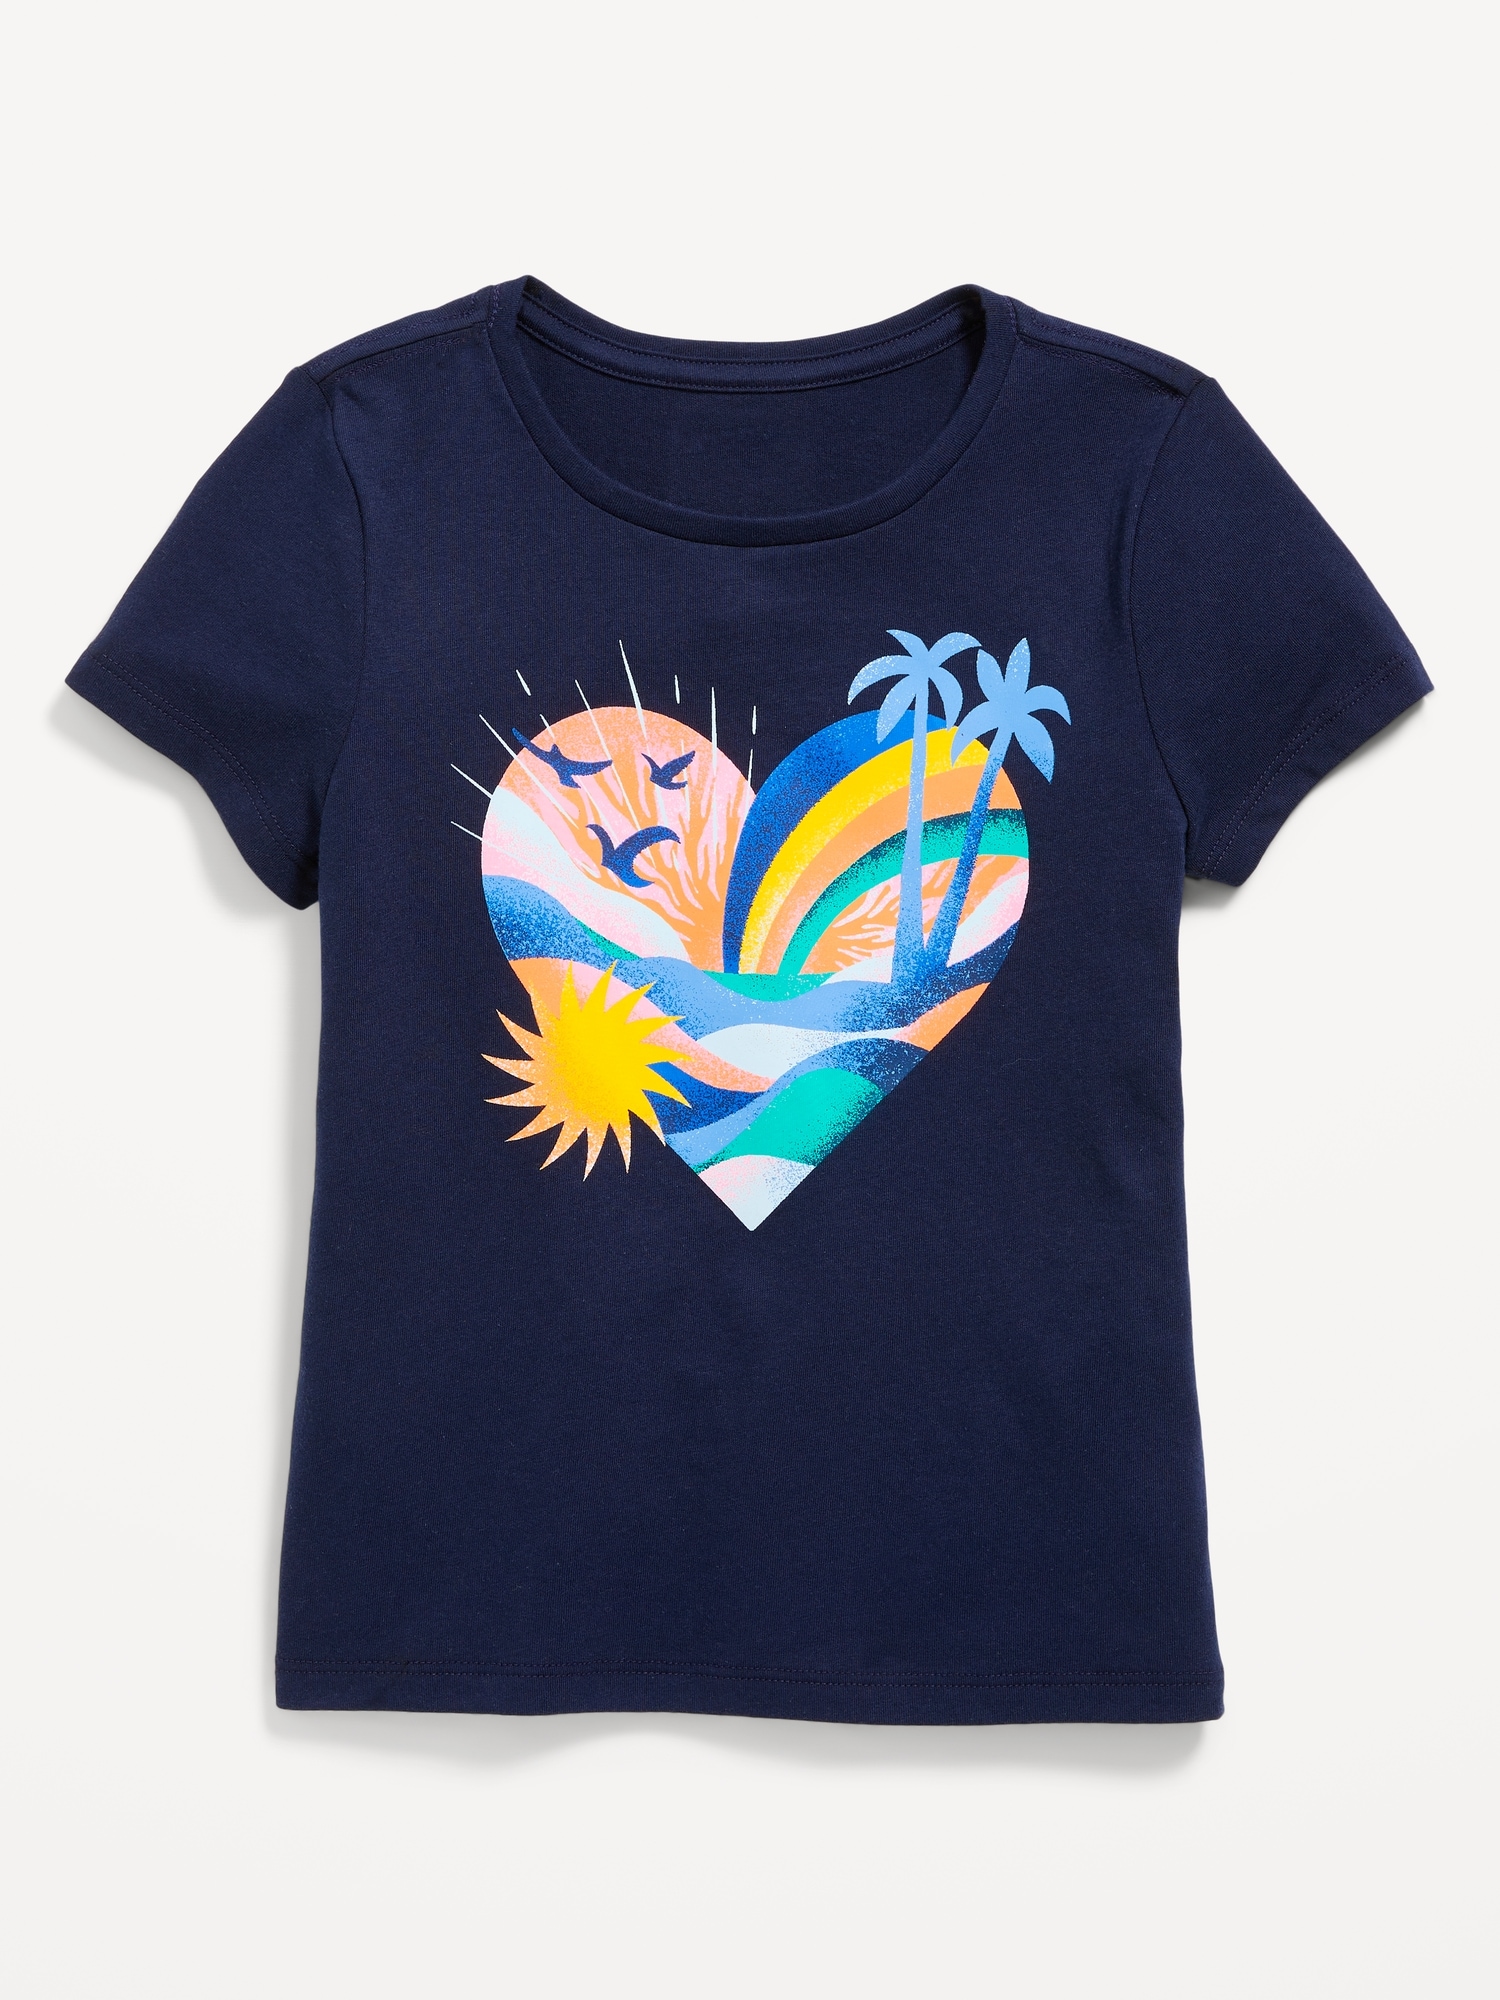 Old Navy Short-Sleeve Graphic T-Shirt for Girls blue. 1